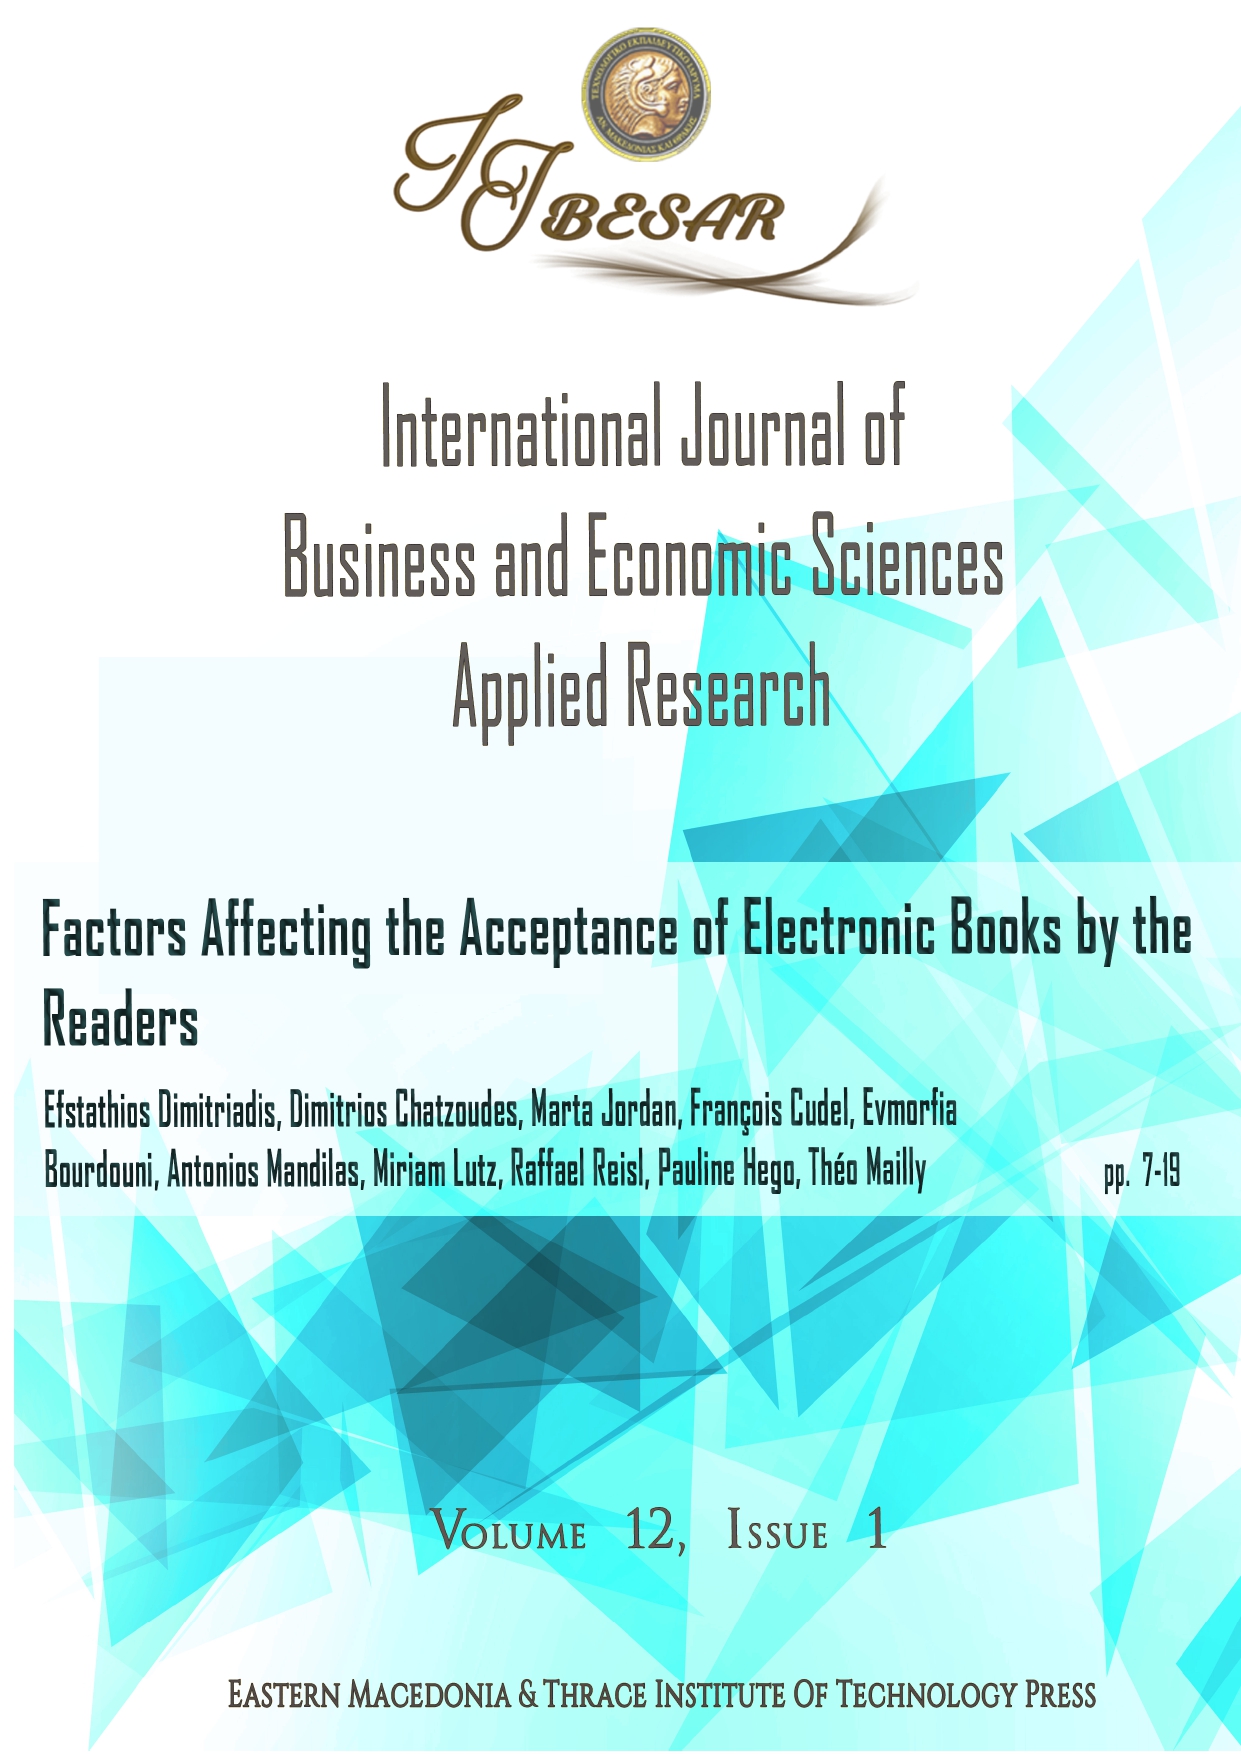 Factors Affecting the Acceptance of Electronic Books by the Readers